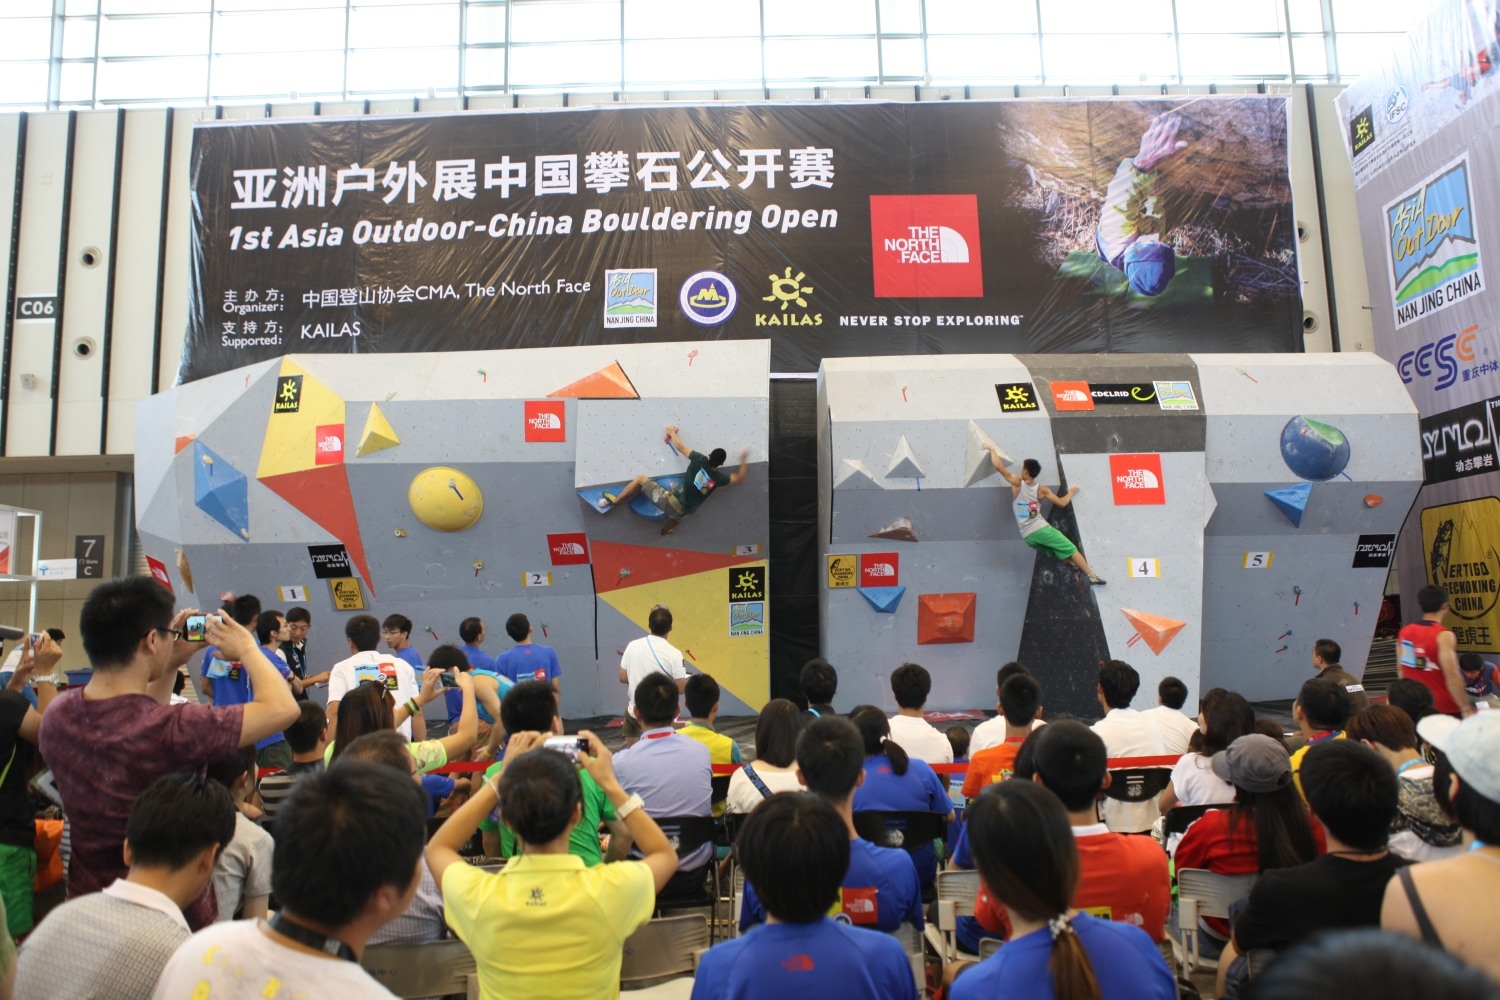 Outdoor China Bouldering Open 